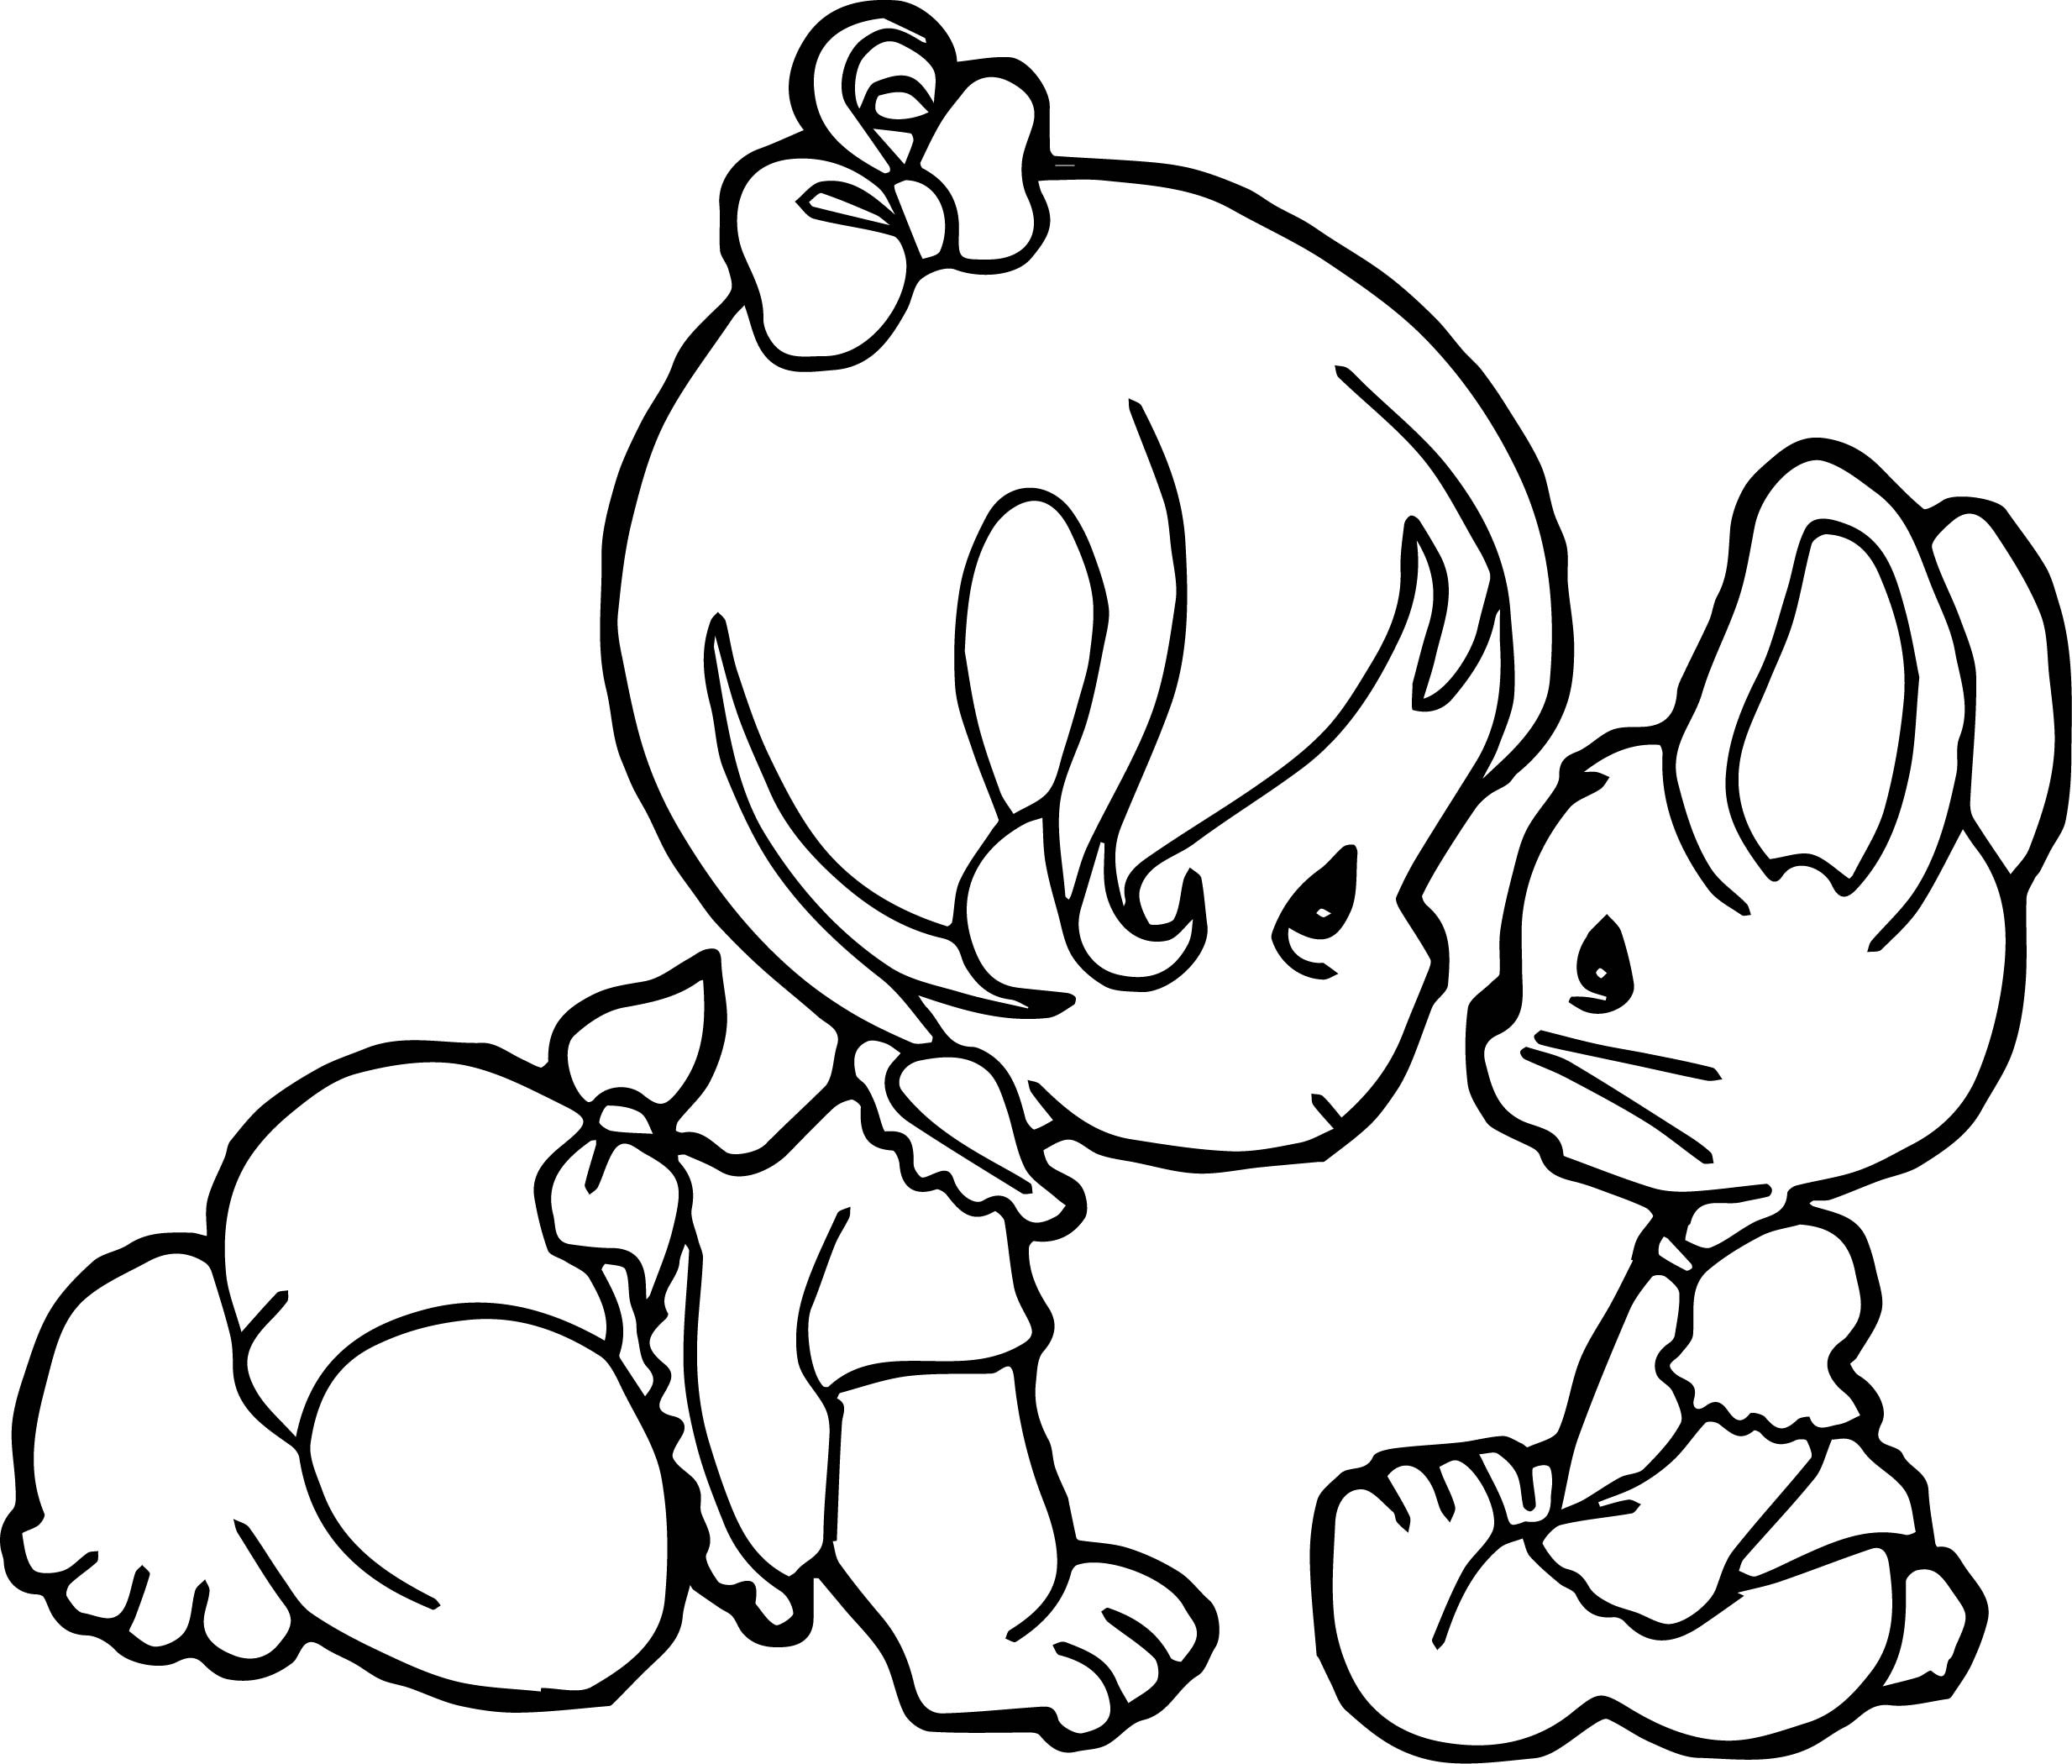 Baby Bunny Coloring Page
 Bunny Coloring Pages